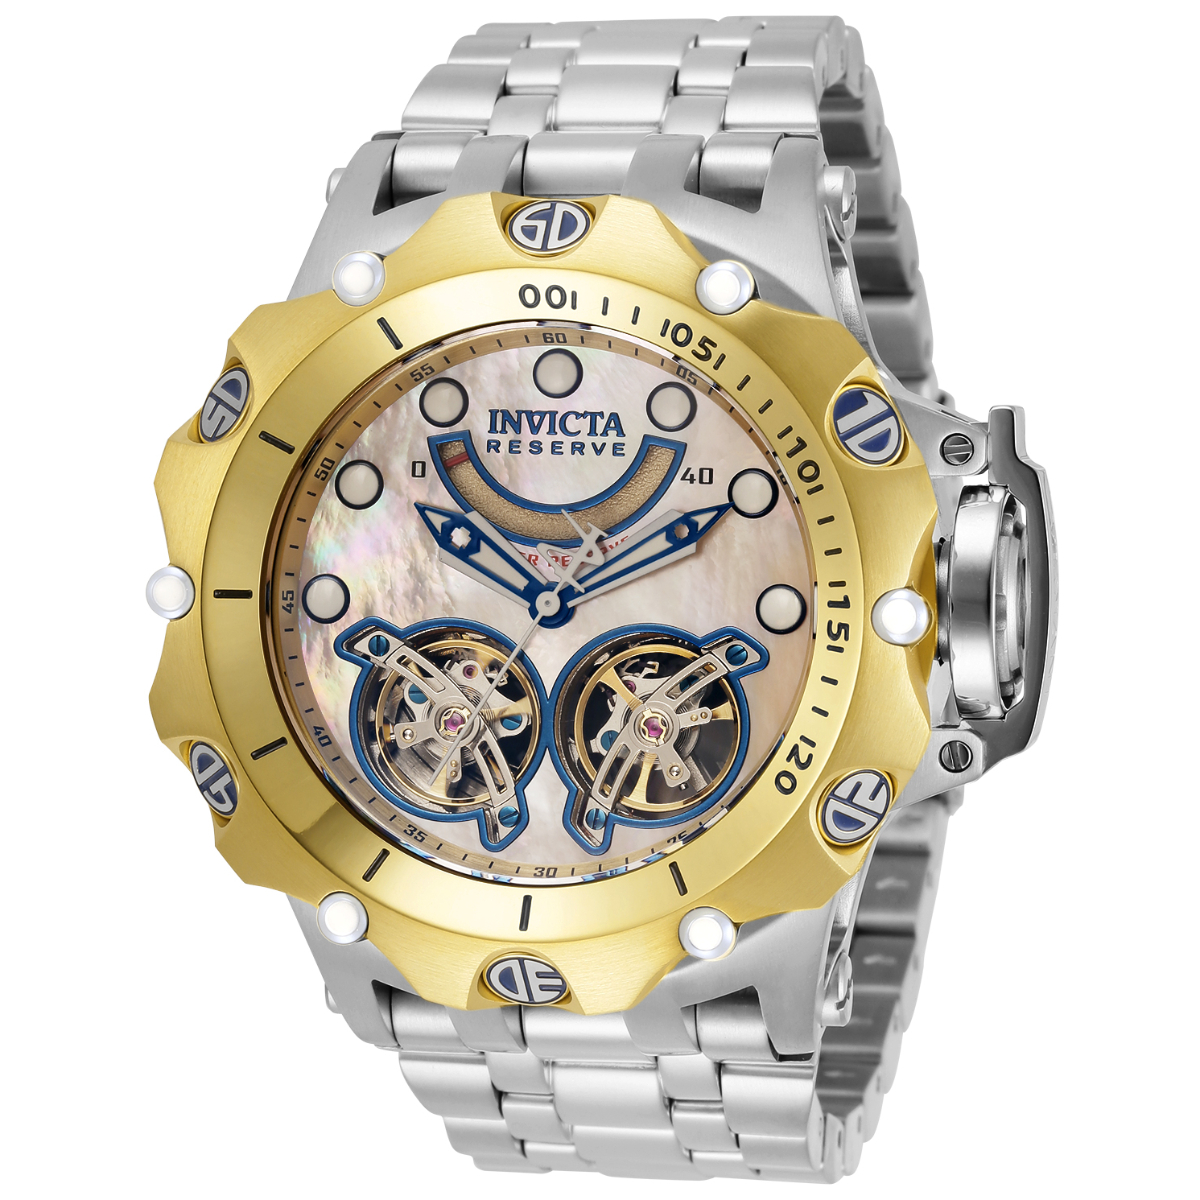 Invicta Reserve Venom Double Open Heart Automatic Men's Watch w/ Metal, Mother of Pearl & Oyster Dial - 51mm, Steel (33543)